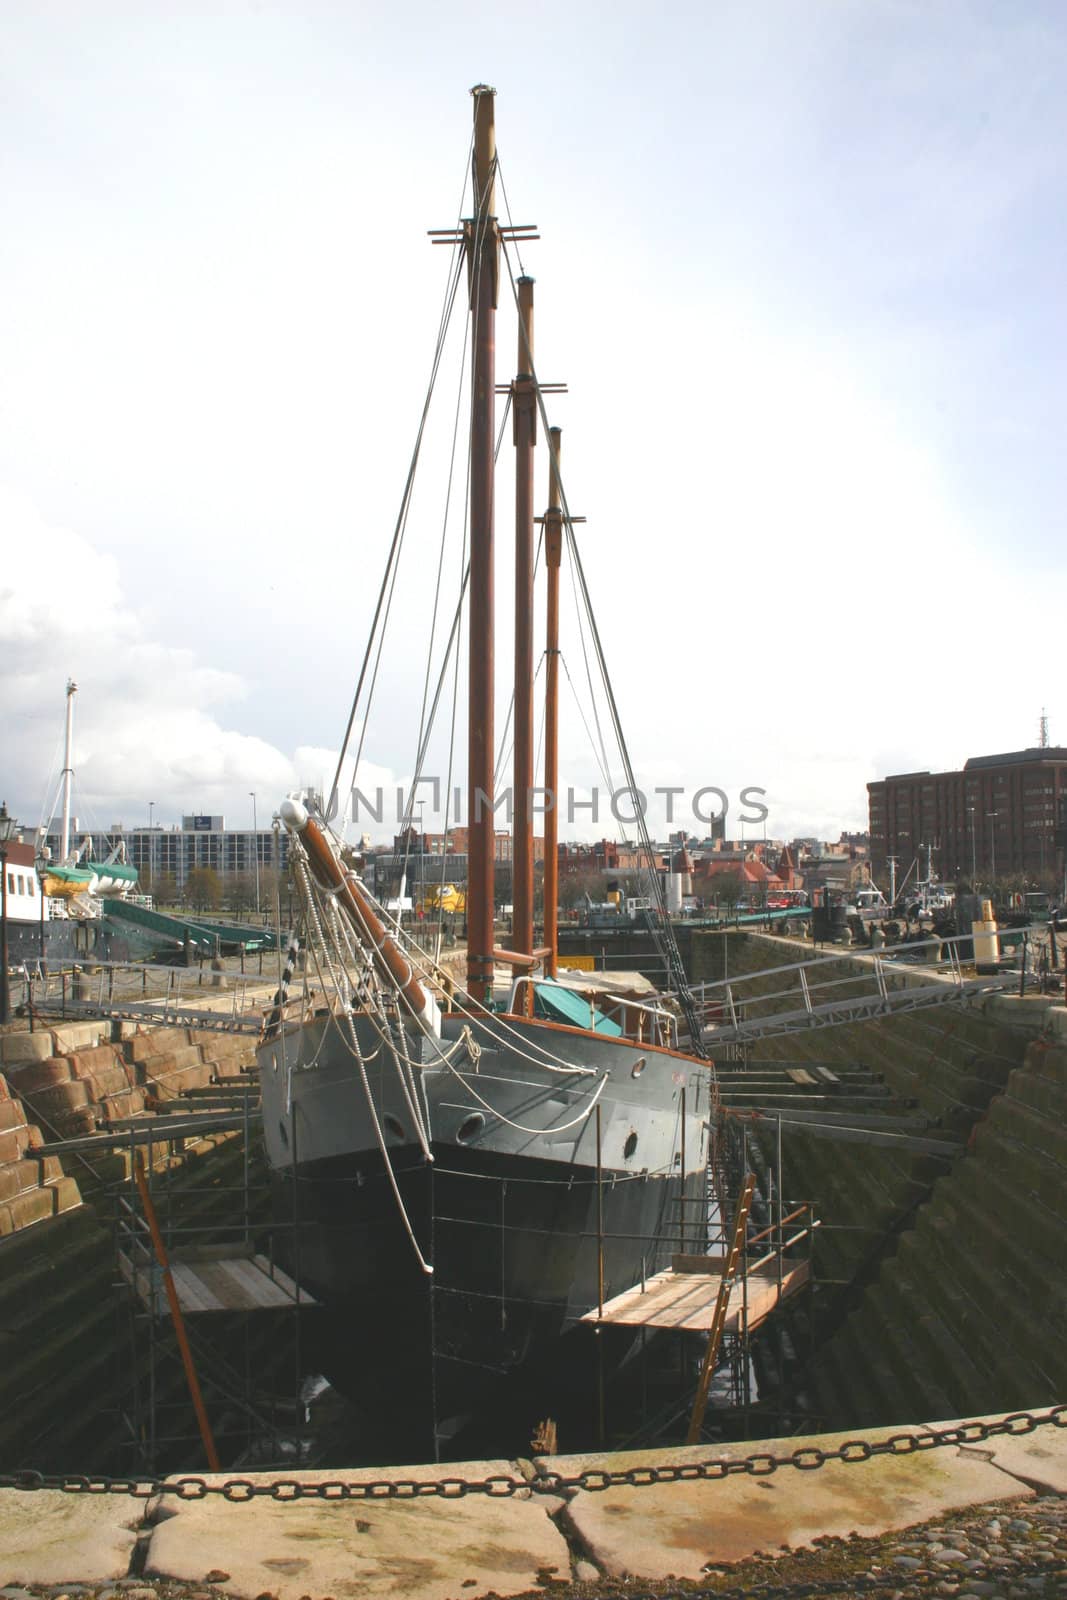 Old Sailing Ship in Dry Dock Liverpool by green308